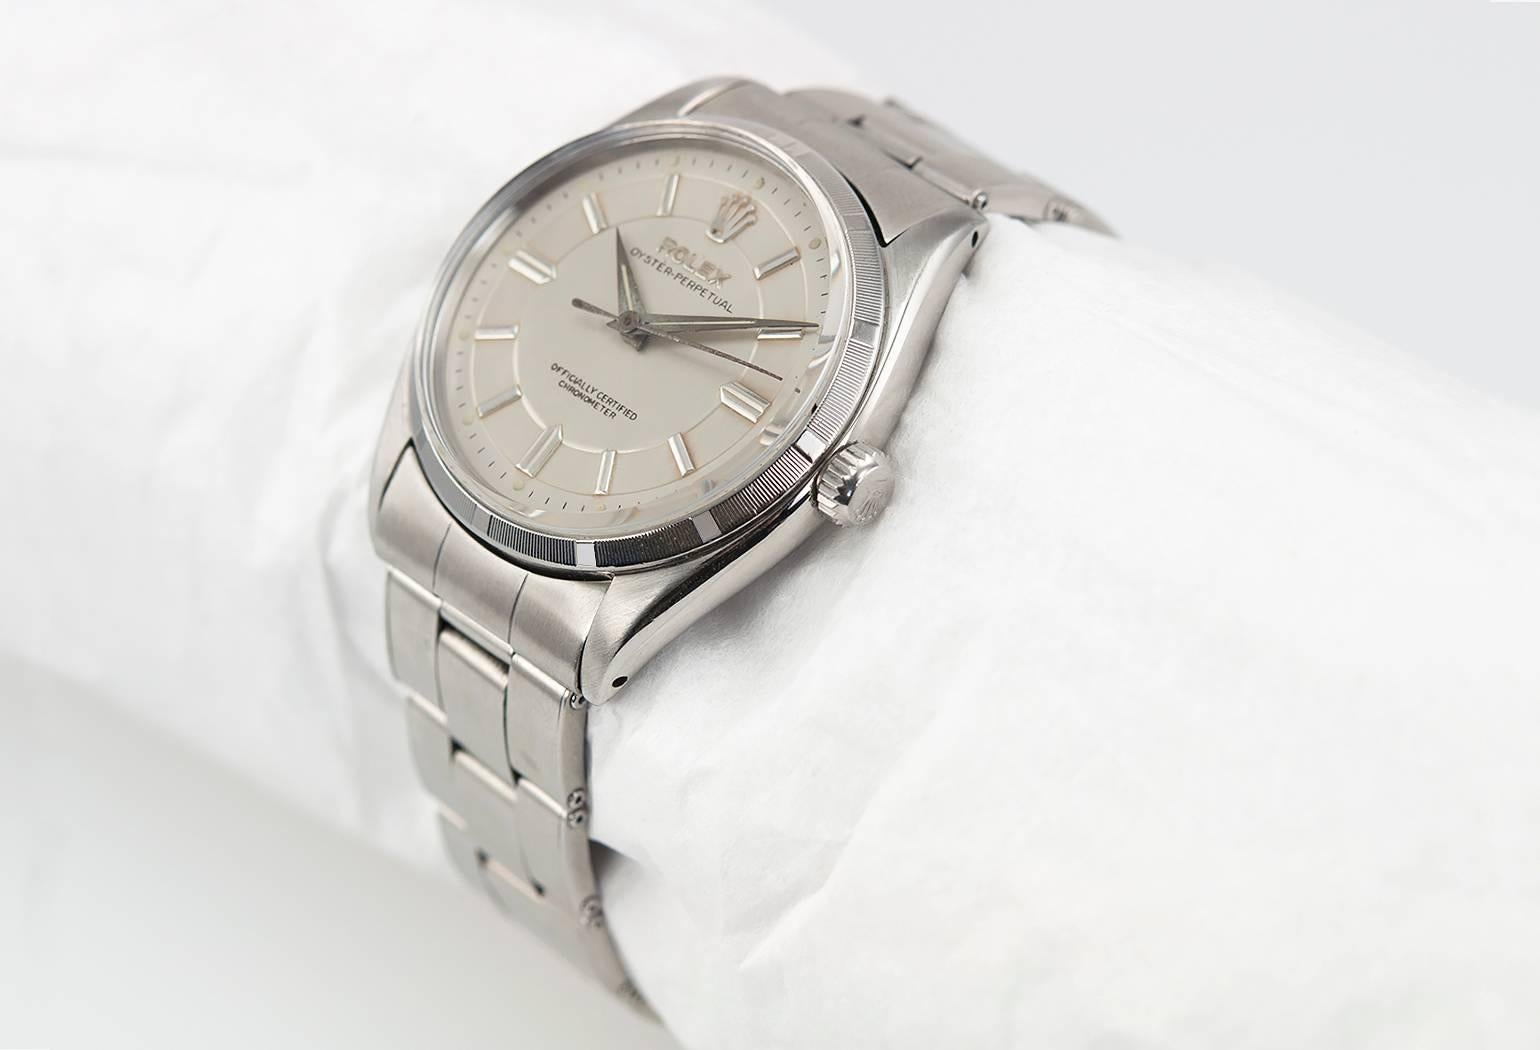 Rolex Oyster Perpetual stainless steel wristwatch, reference 6564. This Rolex watch features a rare refinished white Sector dial, engine turned stainless steel bezel, plastic crystal, locking waterproof crown, riveted oyster bracelet. Circa 1955.